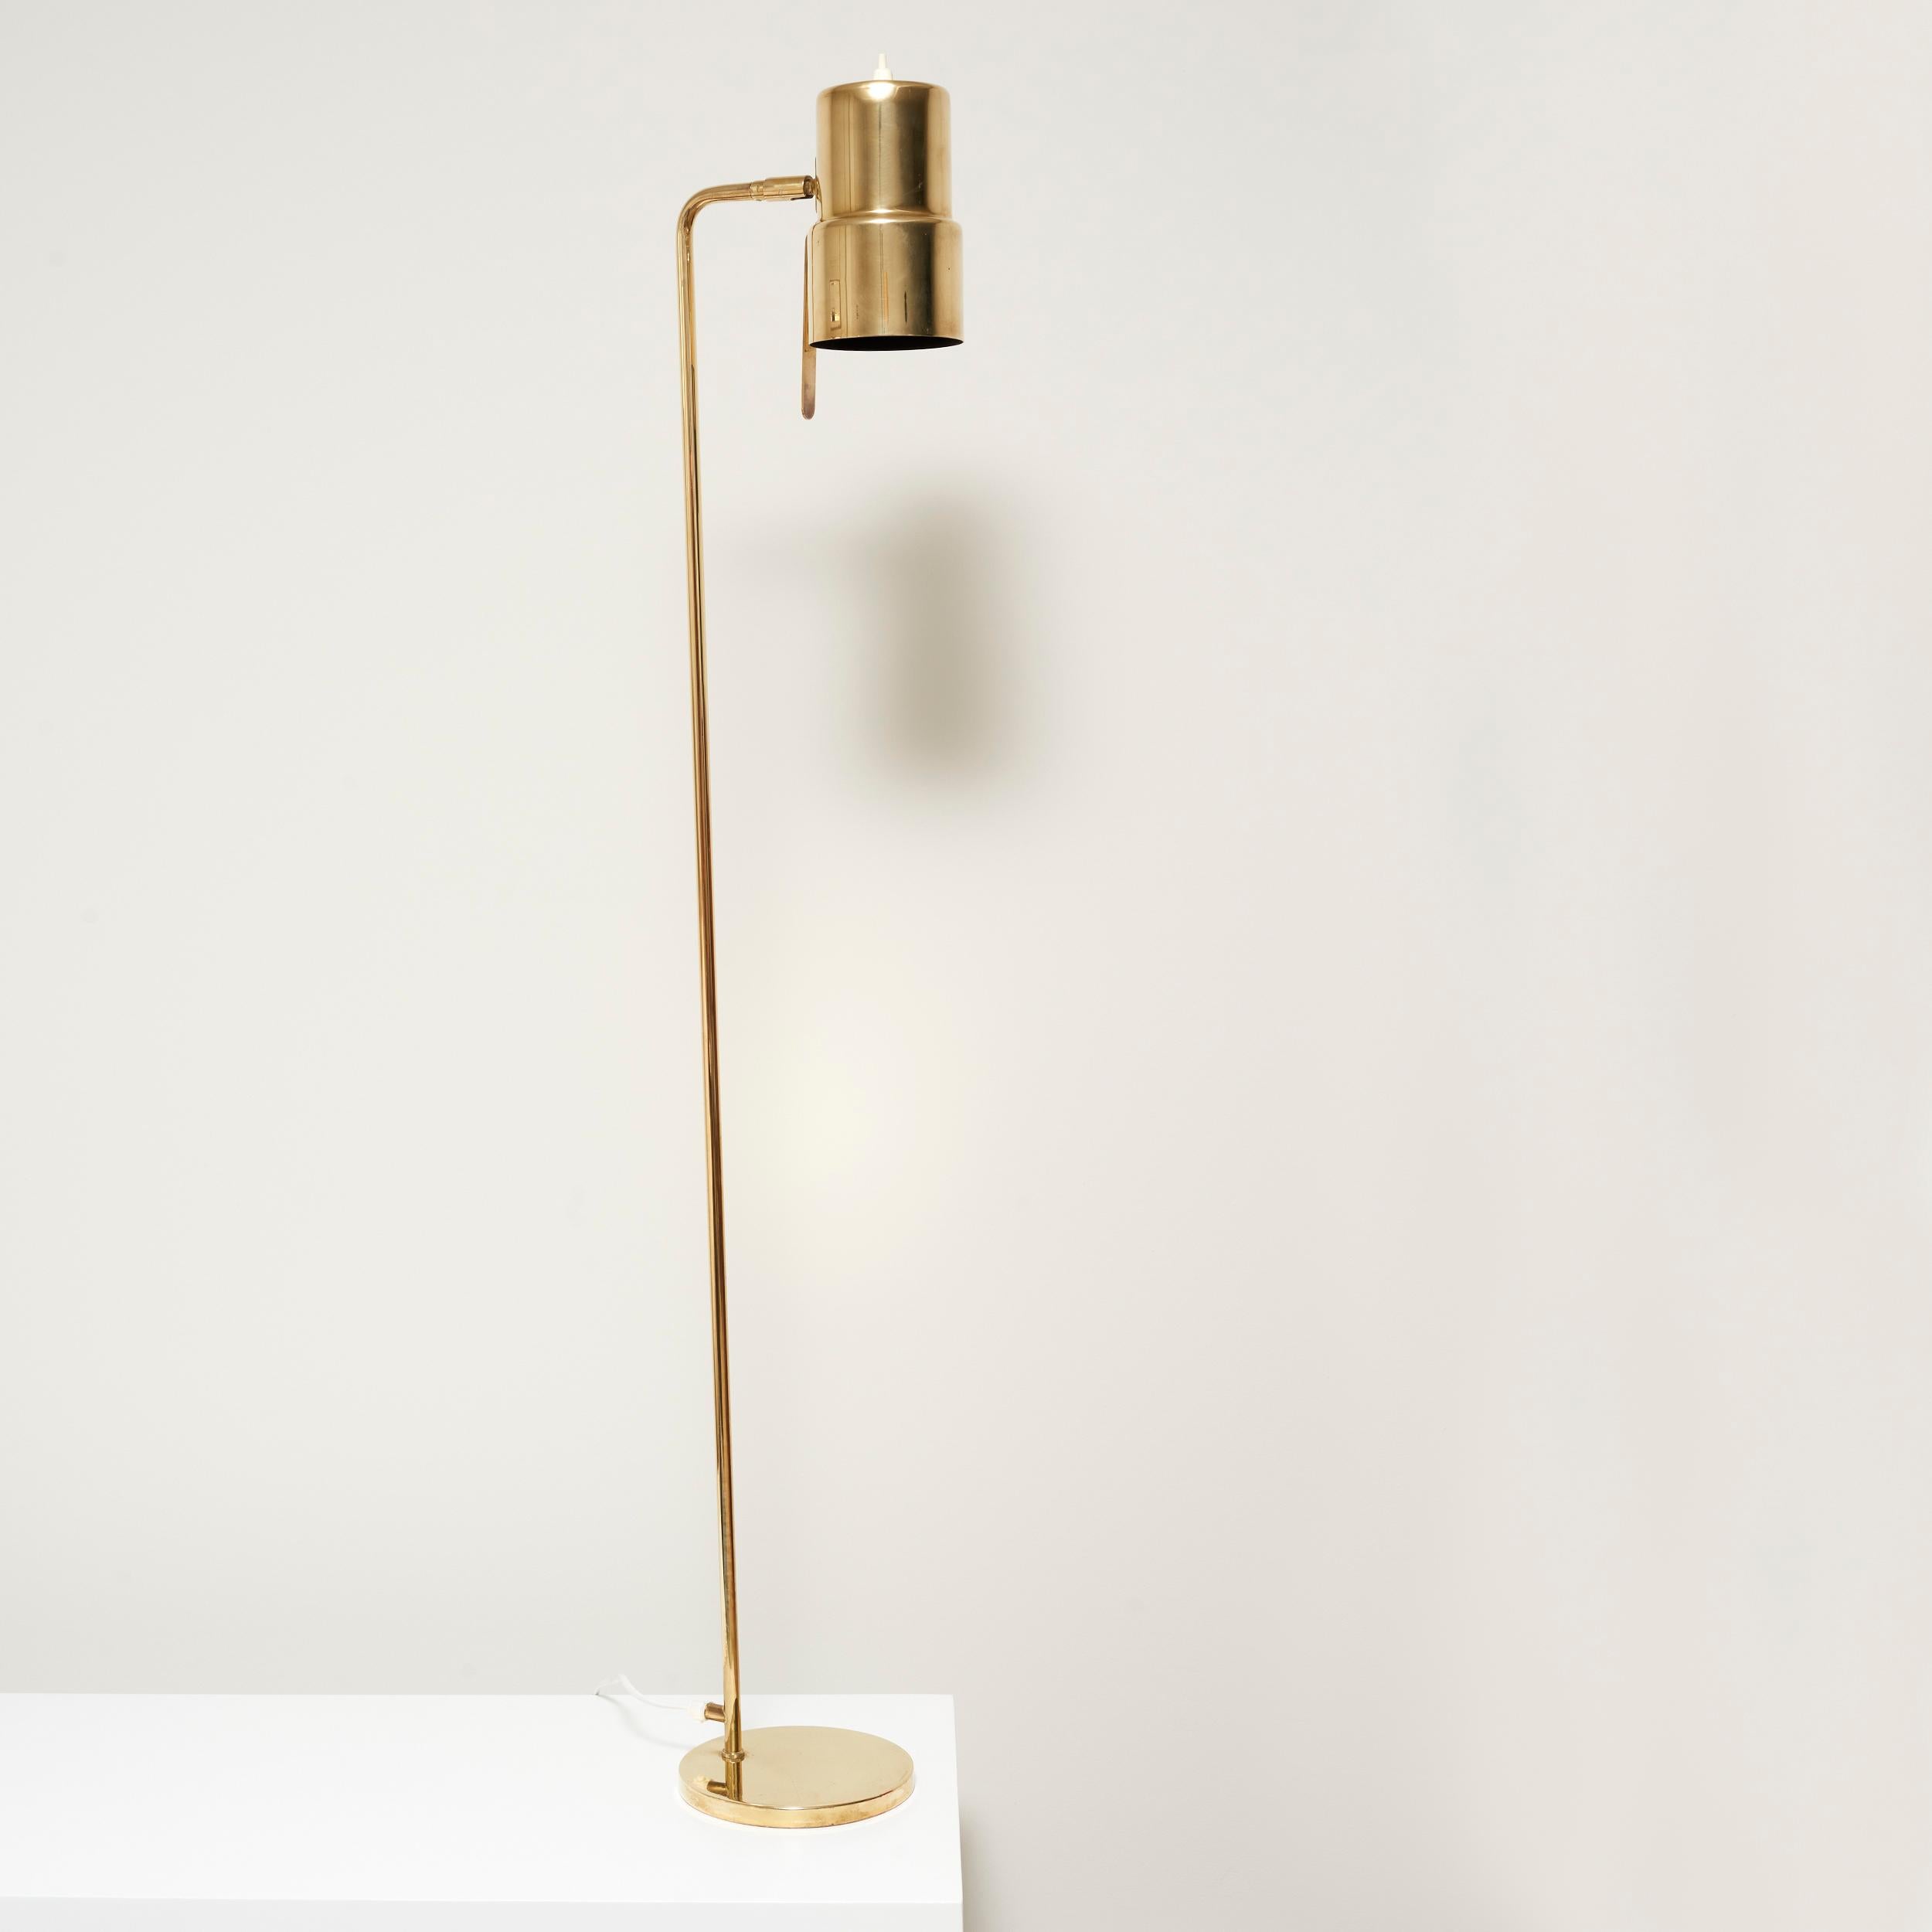 Brass floor lamp designed by Hans-agne Jakobsson for Markaryd AB. Sweden, 1960’s. Adjustable lampshade and round foot in brass in a very good vintage condition. 

Hans-Agne Jakobsson was a Swedish interior and furniture designer. He was famed for